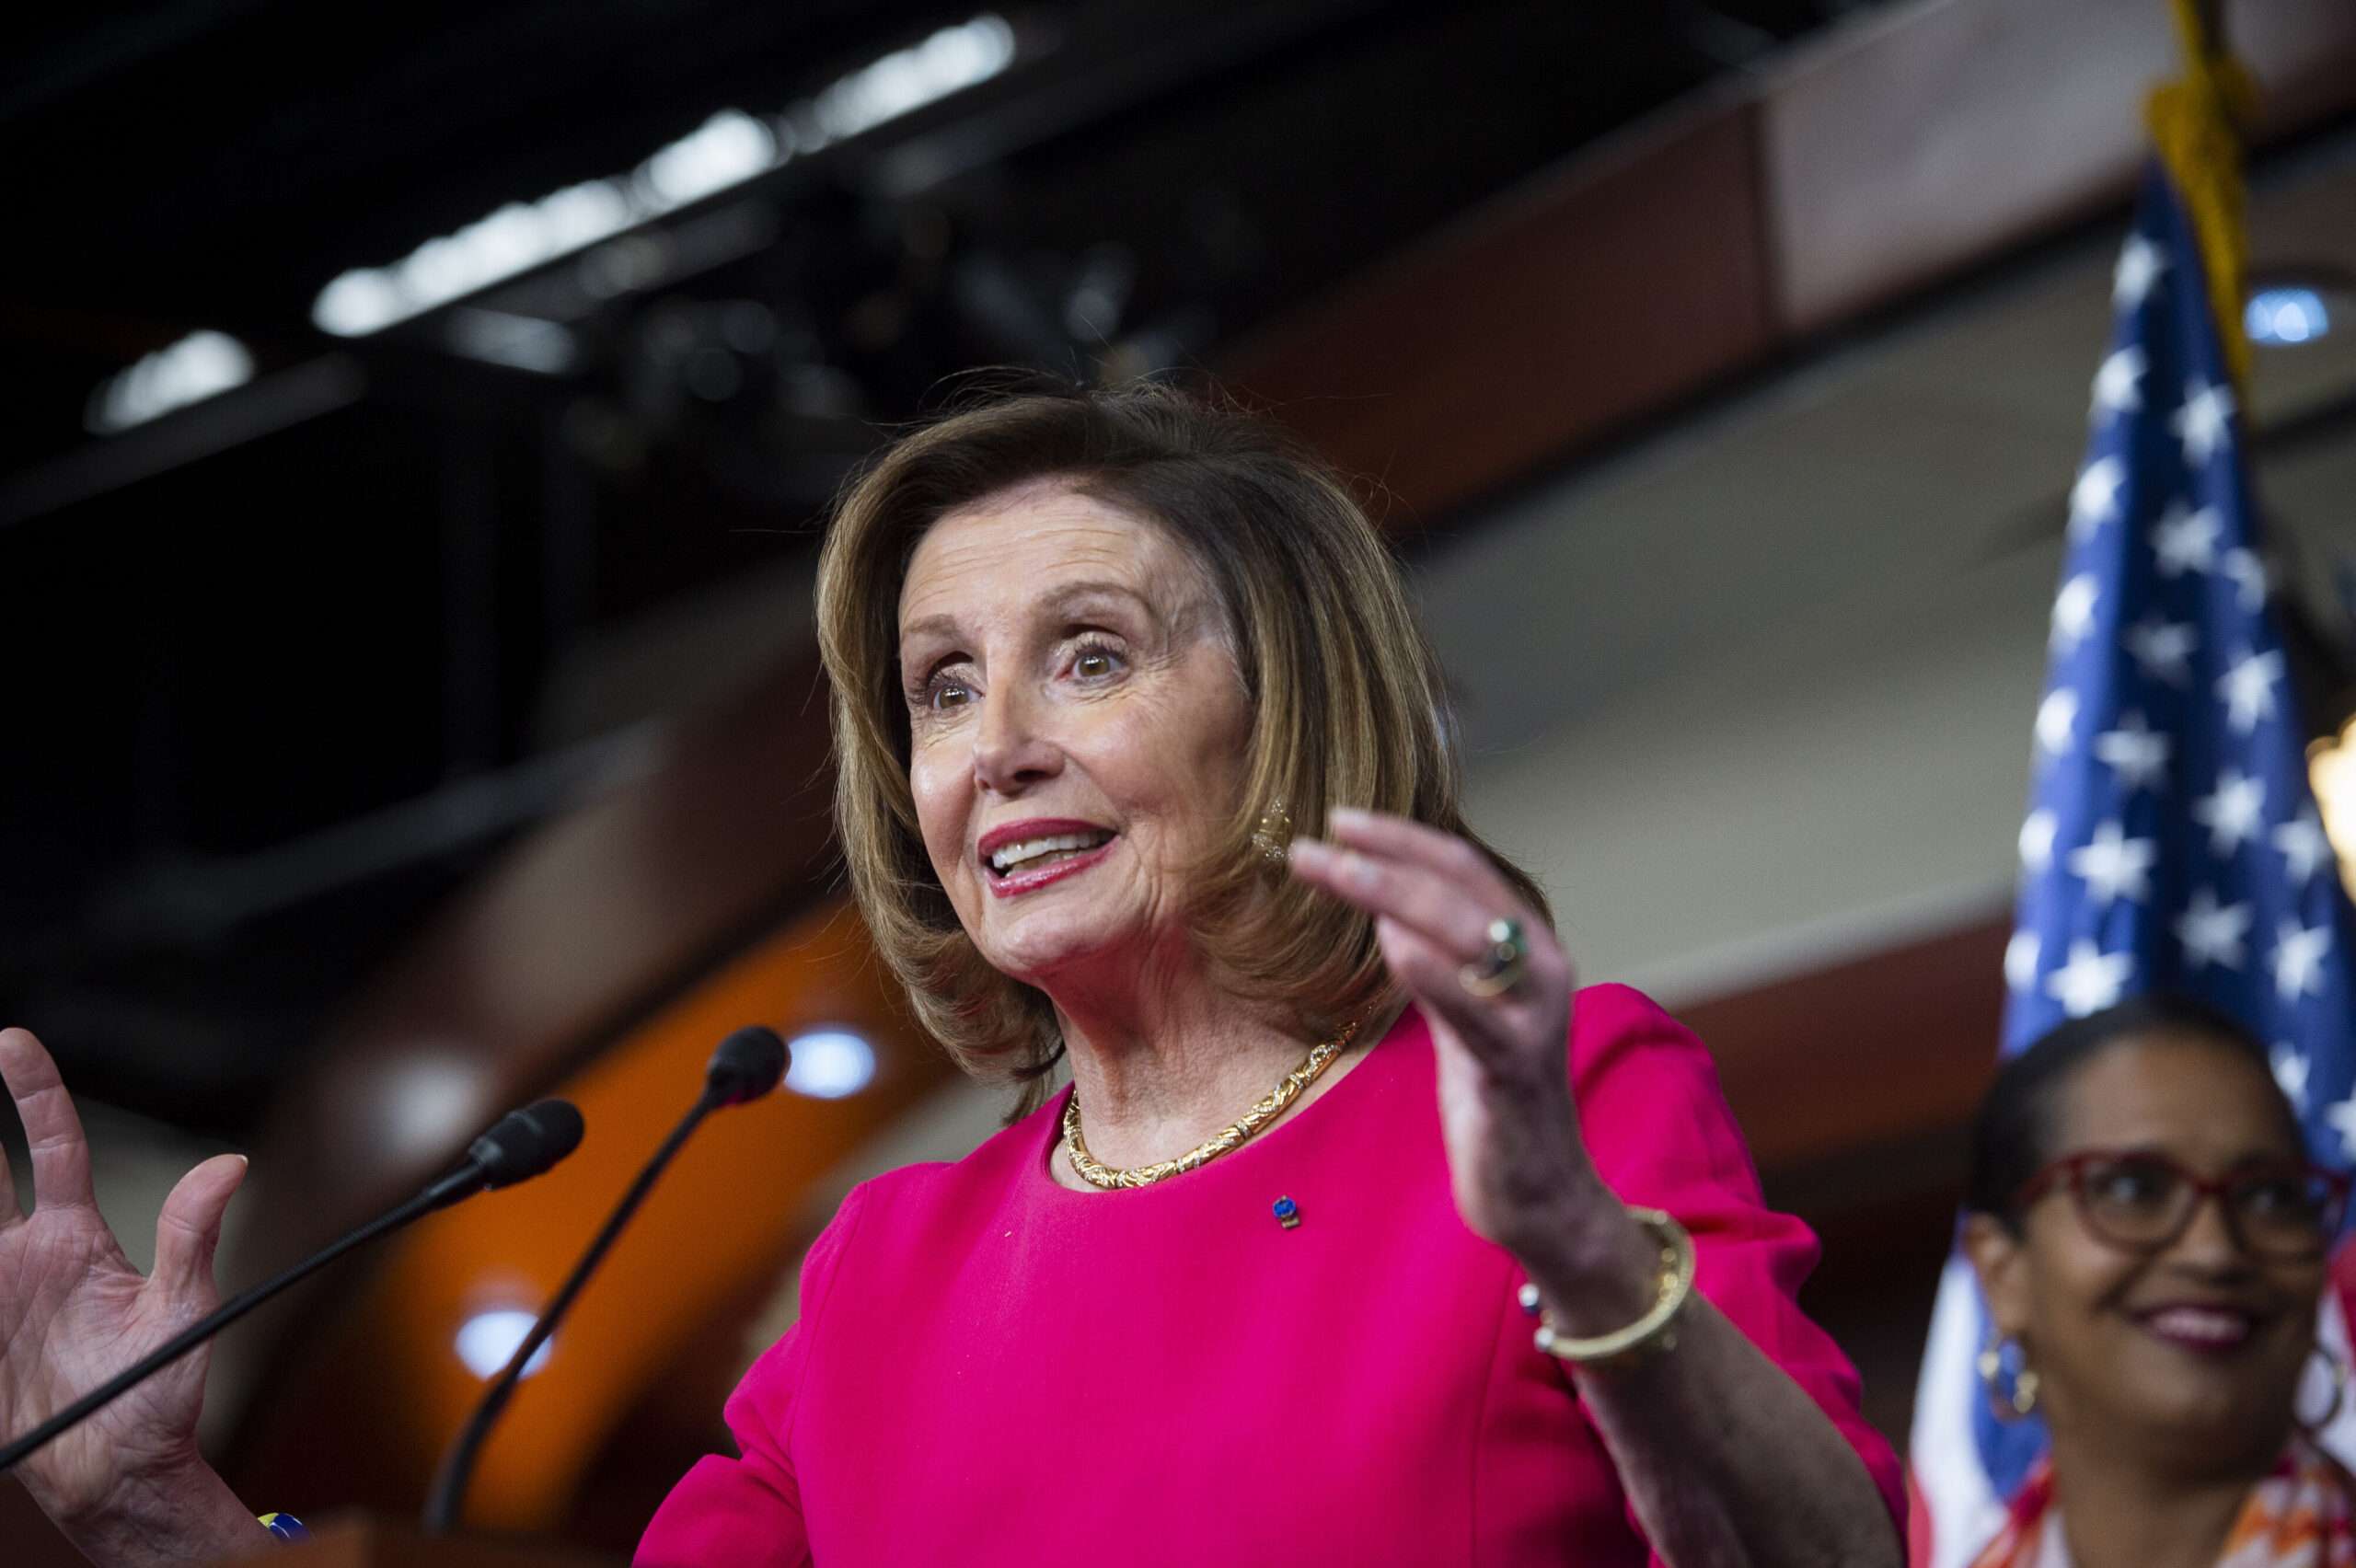 San Francisco Archbishop Bars Nancy Pelosi From Communion Over Abortion Stance